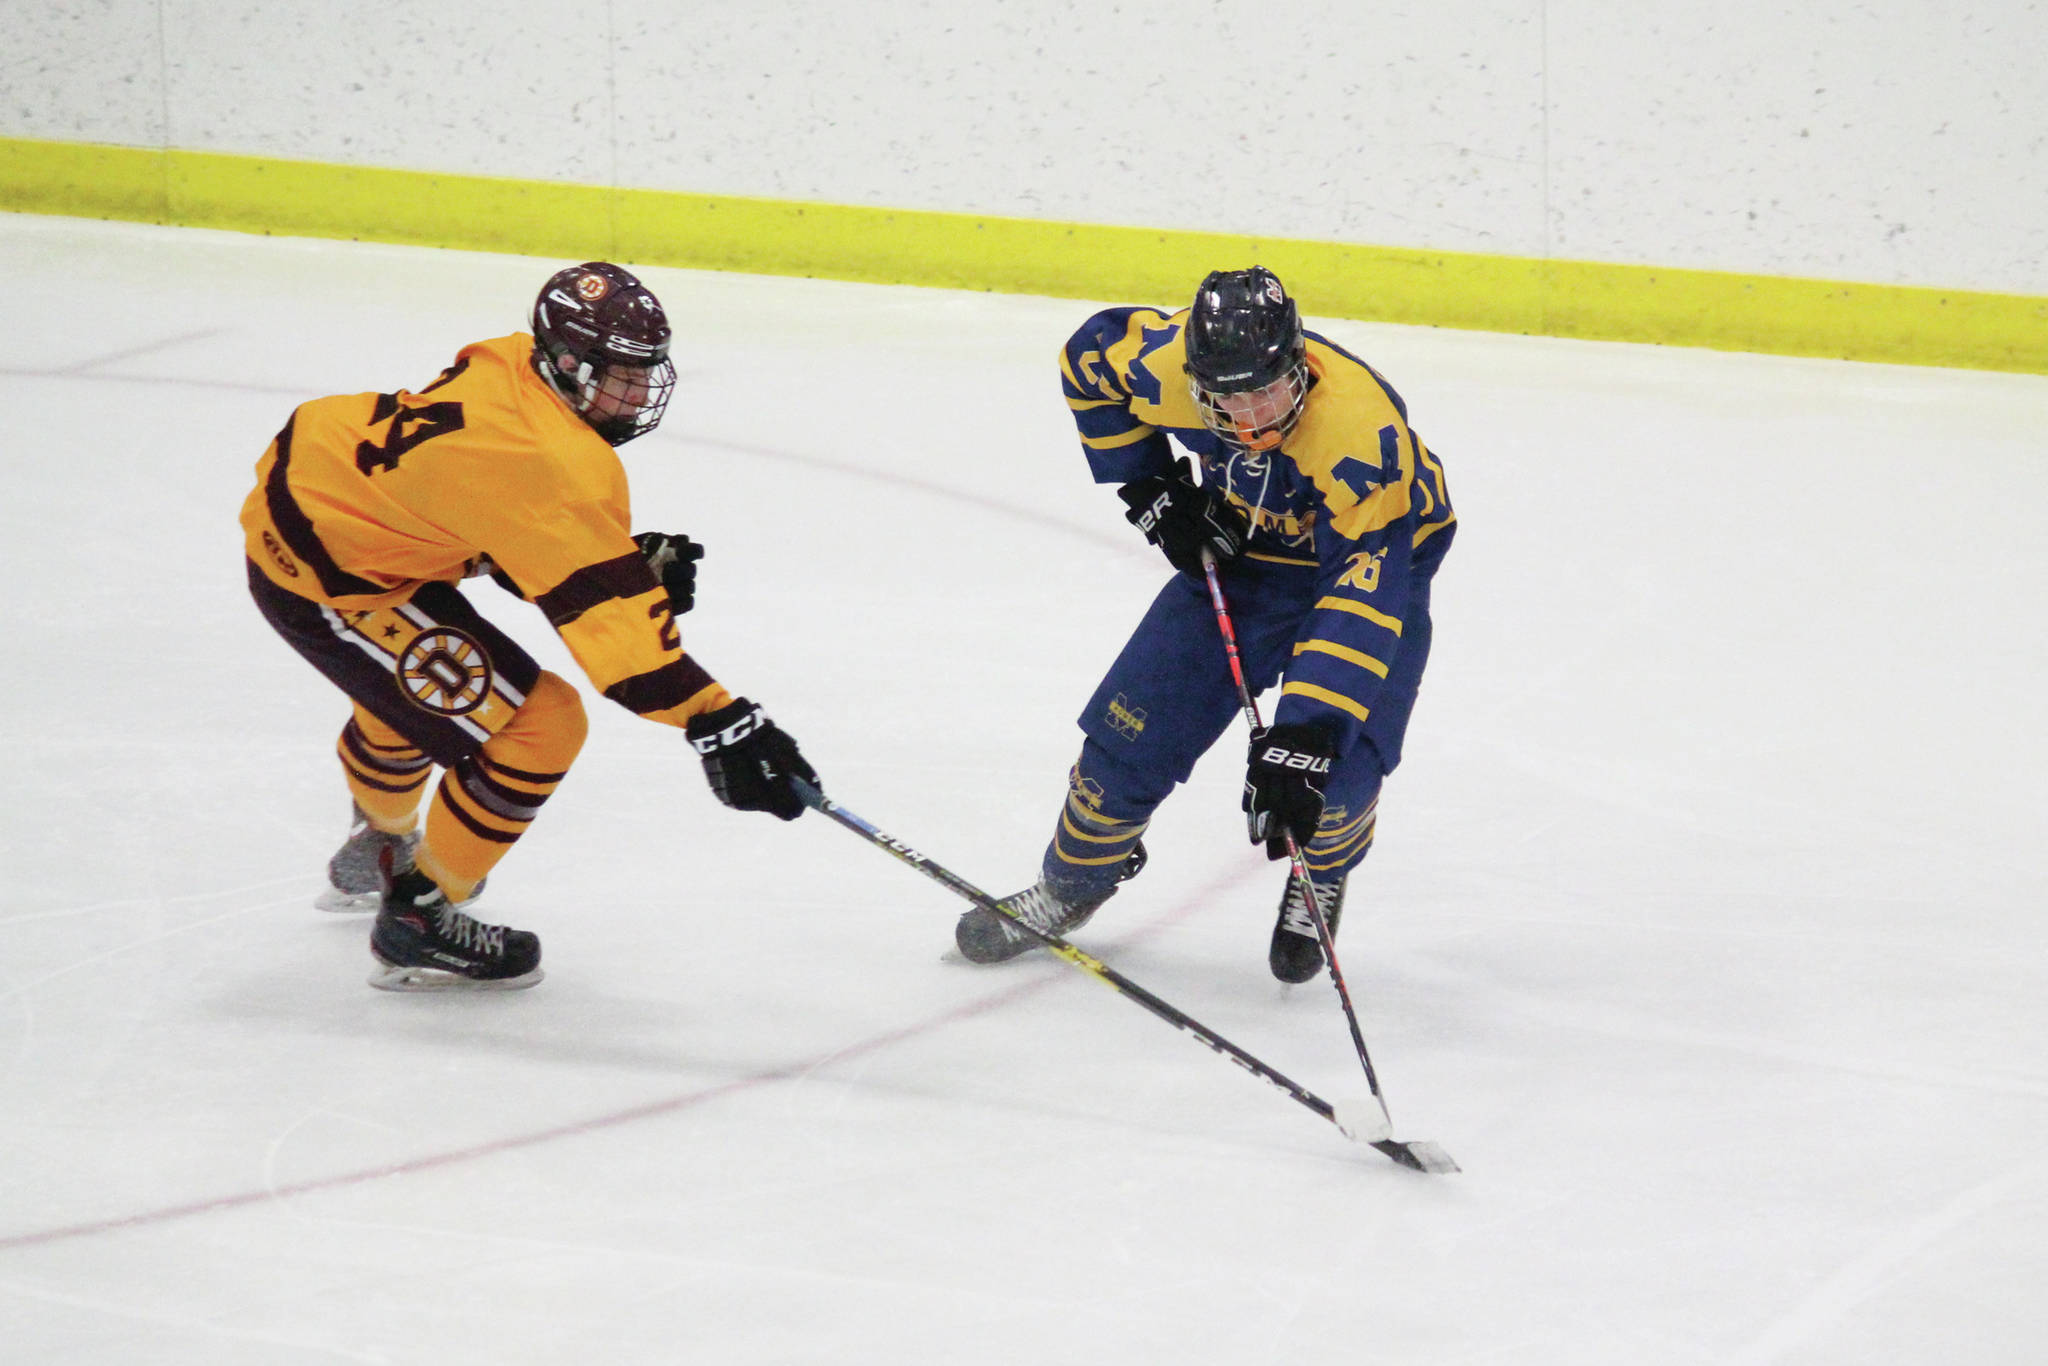 Homer’s Ethan Pitzman and Dimond’s Drake Reid connect over the puck during a Friday, Feb. 14, 2020 game in the 2020 ASAA First National Cup Division I Hockey State Championship at the Curtis D. Menard Memorial Sports Center in Wasilla, Alaska. (Photo by Megan Pacer/Homer News)